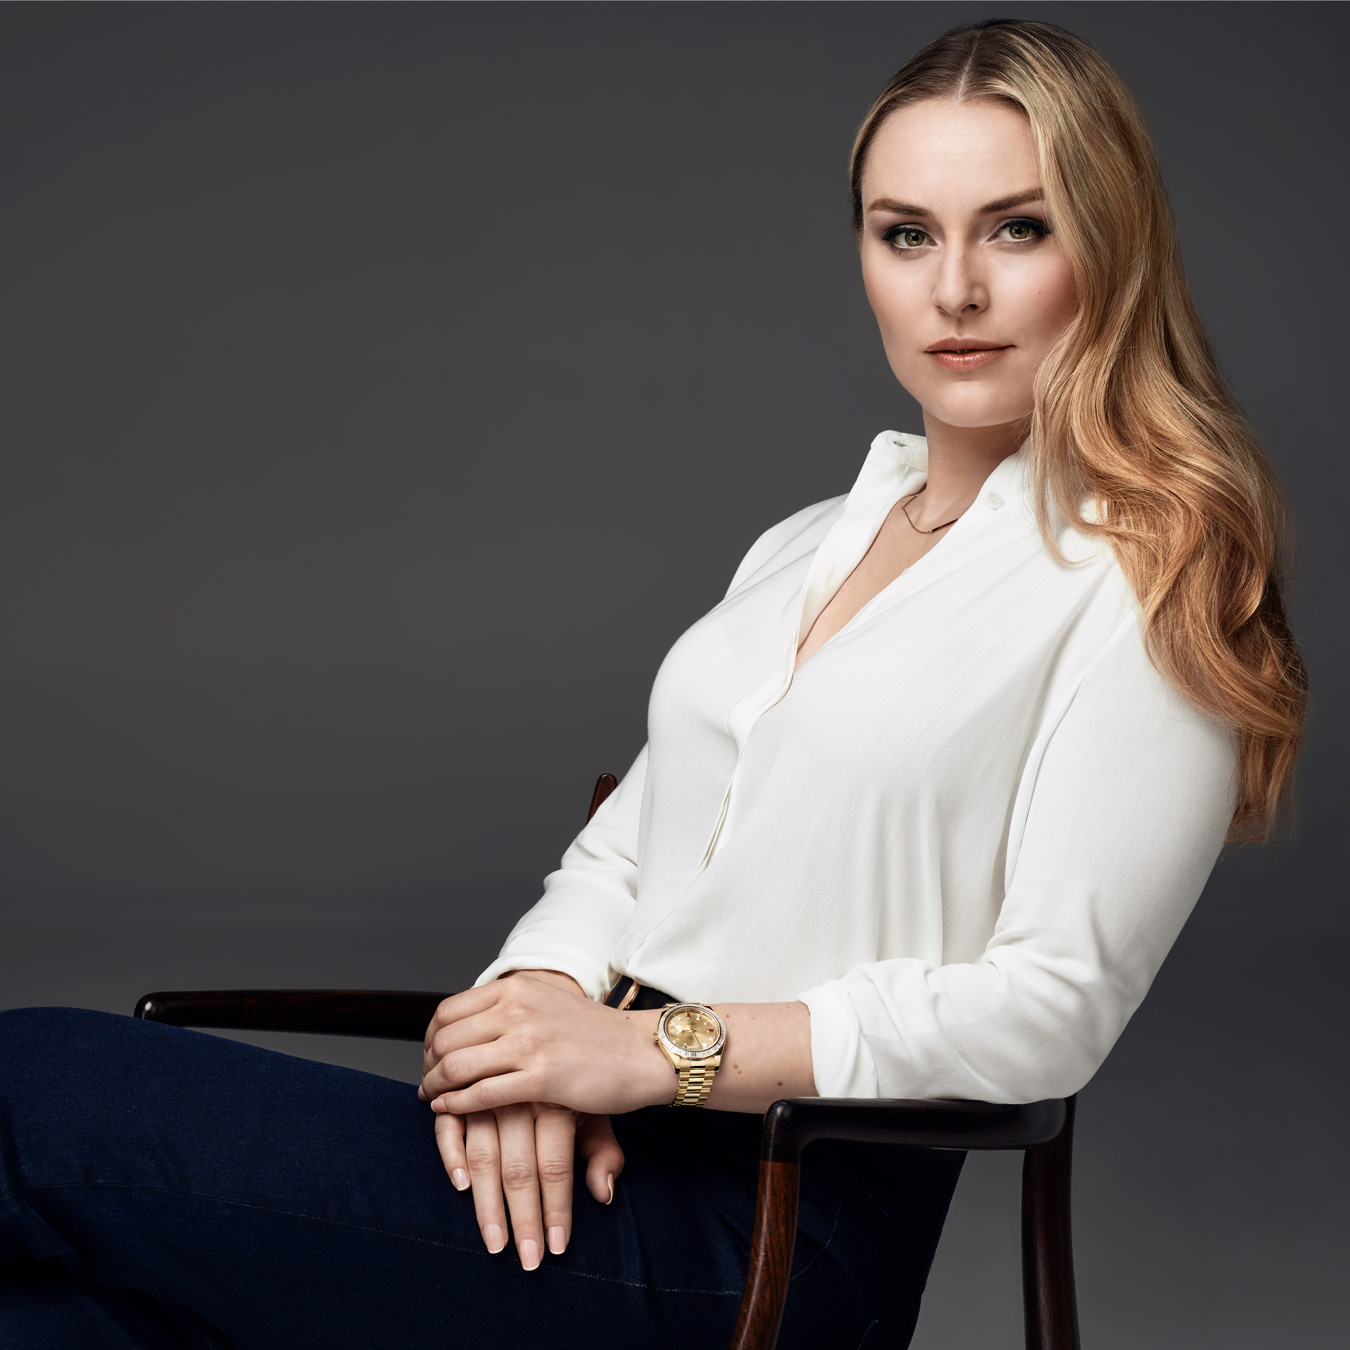 Champion skier Lindsey Vonn wearing a yellow gold Day-Date